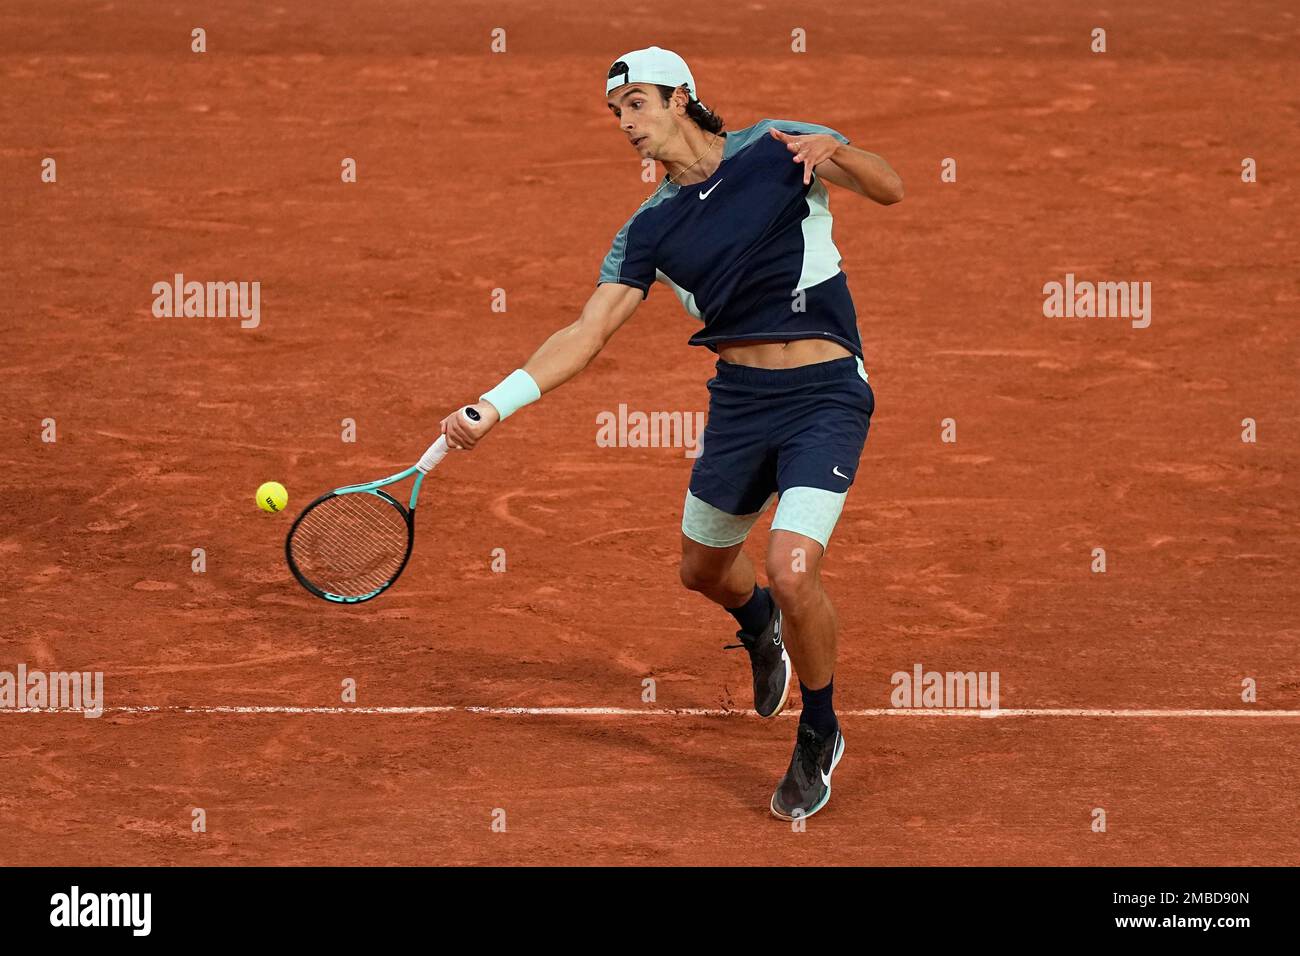 Italys Lorenzo Musetti returns the ball to Greeces Stefanos Tsitsipas during their first round match of the French Open tennis tournament at the Roland Garros stadium Tuesday, May 24, 2022 in Paris